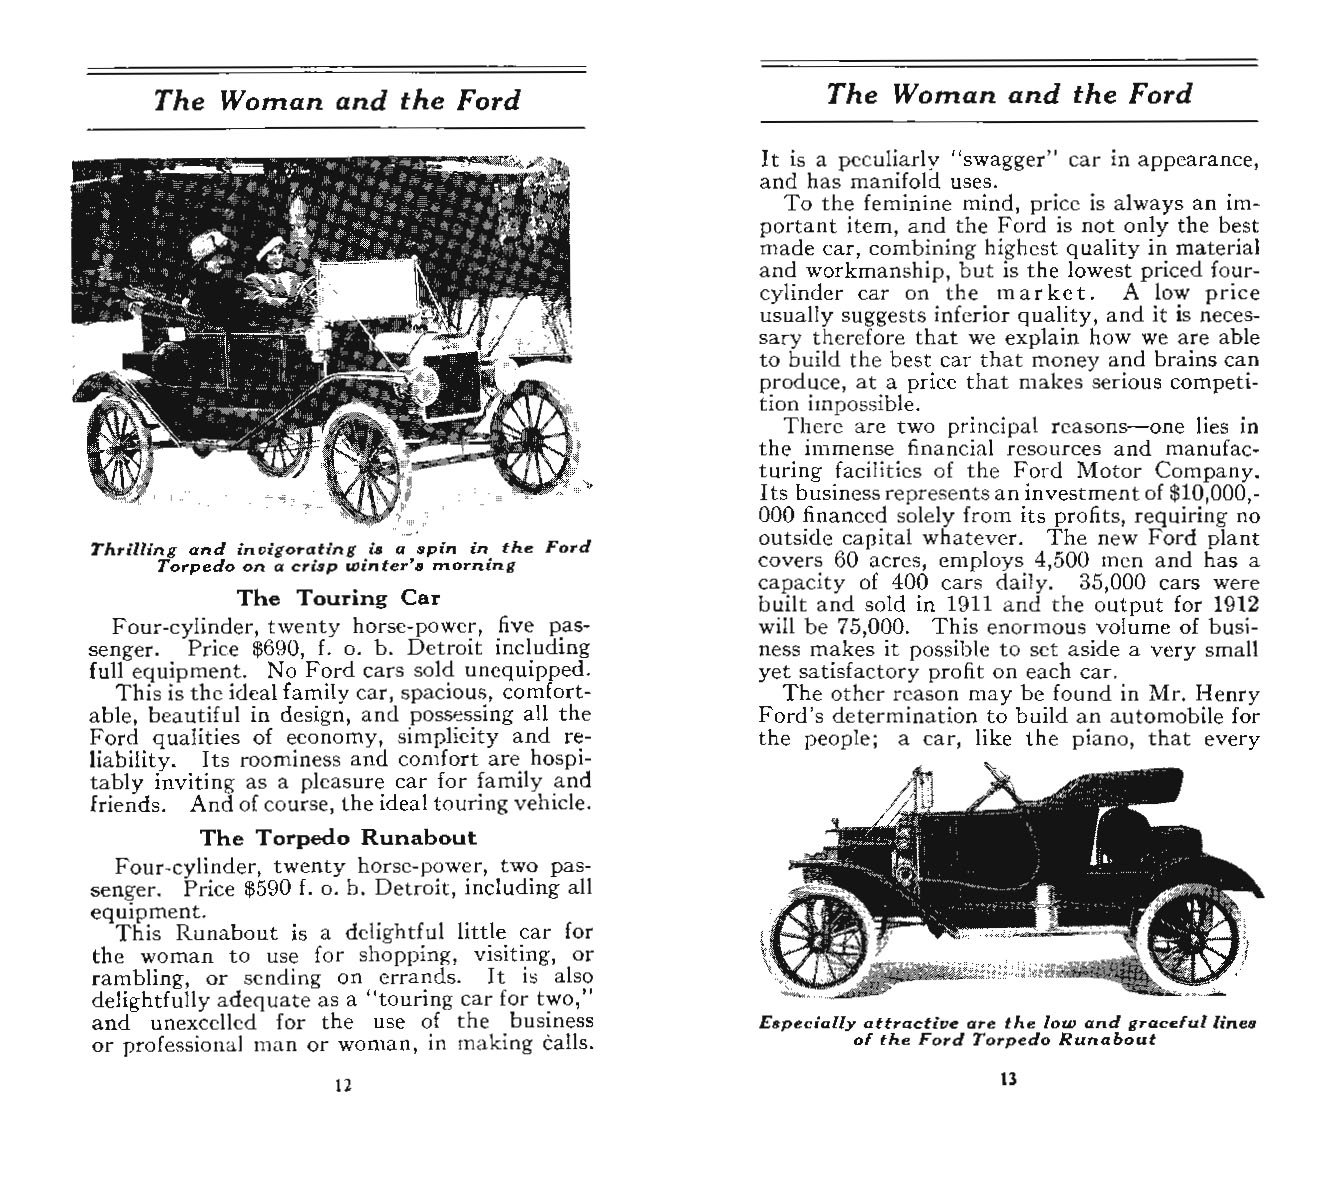 n_1912 The Woman & the Ford-12-13.jpg